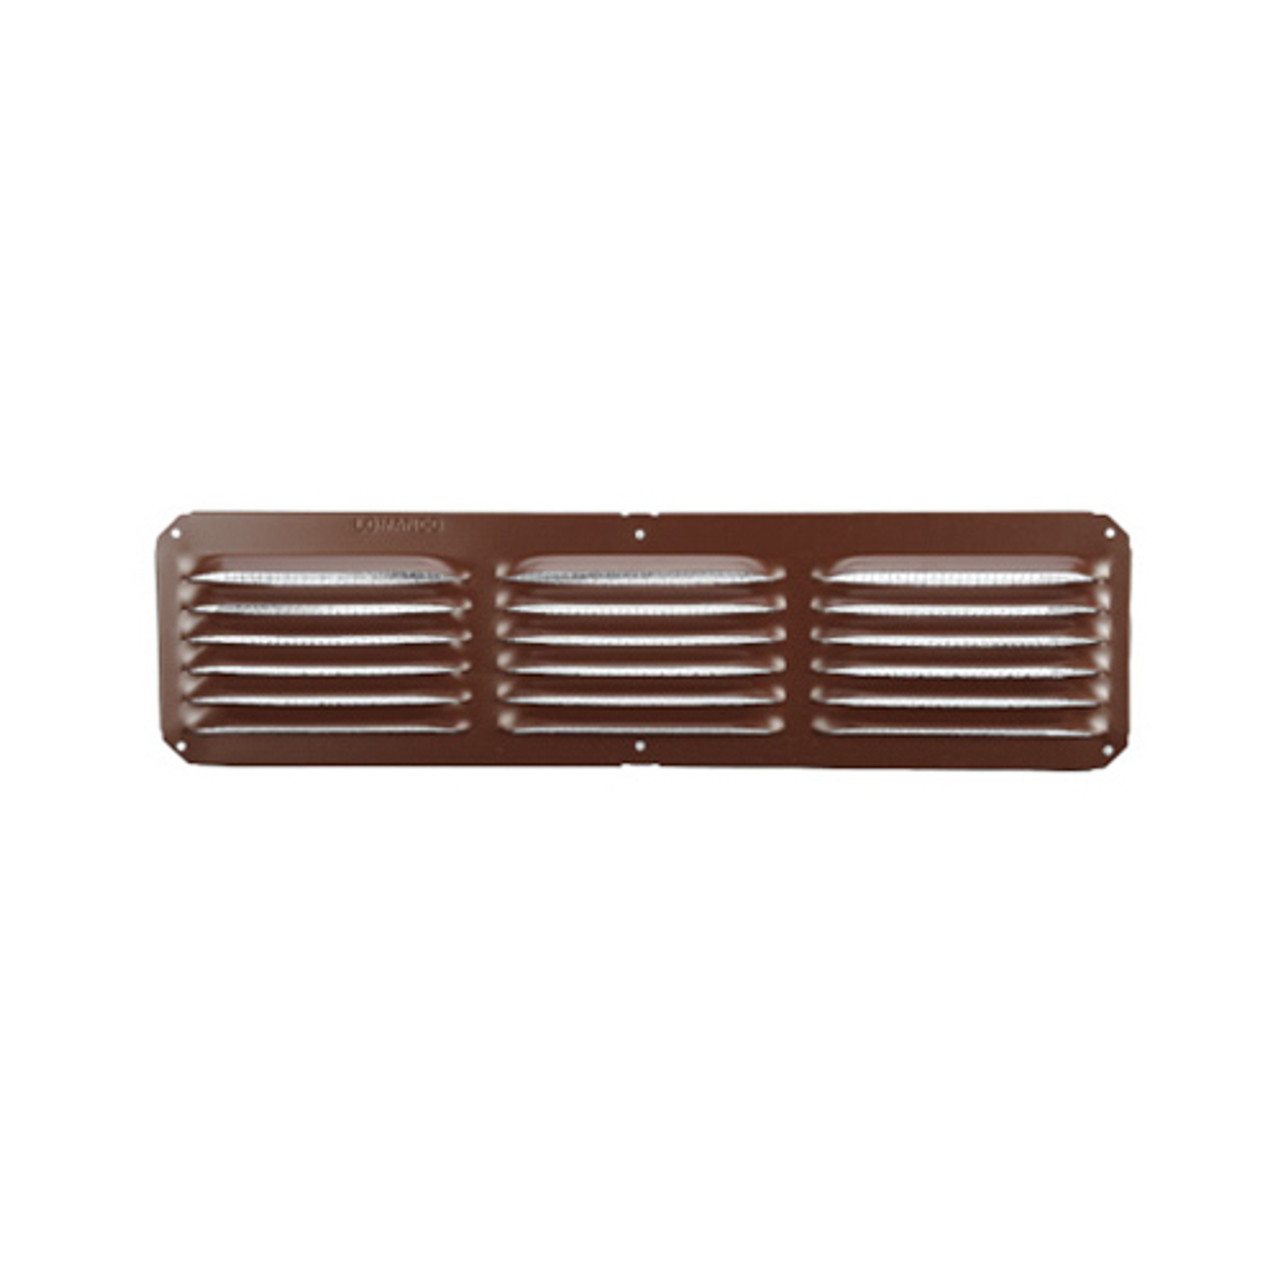 The image features a set of four Lomanco C416 Brown Cornice Vents neatly arranged in a row. Each vent measures 4x16 inches, presenting a sleek and functional design. The vents exhibit a rich brown color, seamlessly blending with various architectural styles. The textured surface adds a subtle touch, enhancing both aesthetics and durability. These vents are designed to efficiently ventilate and aerate spaces while maintaining an unobtrusive appearance. The precisely crafted details reflect Lomanco's commitment to quality and performance in ventilation solutions.